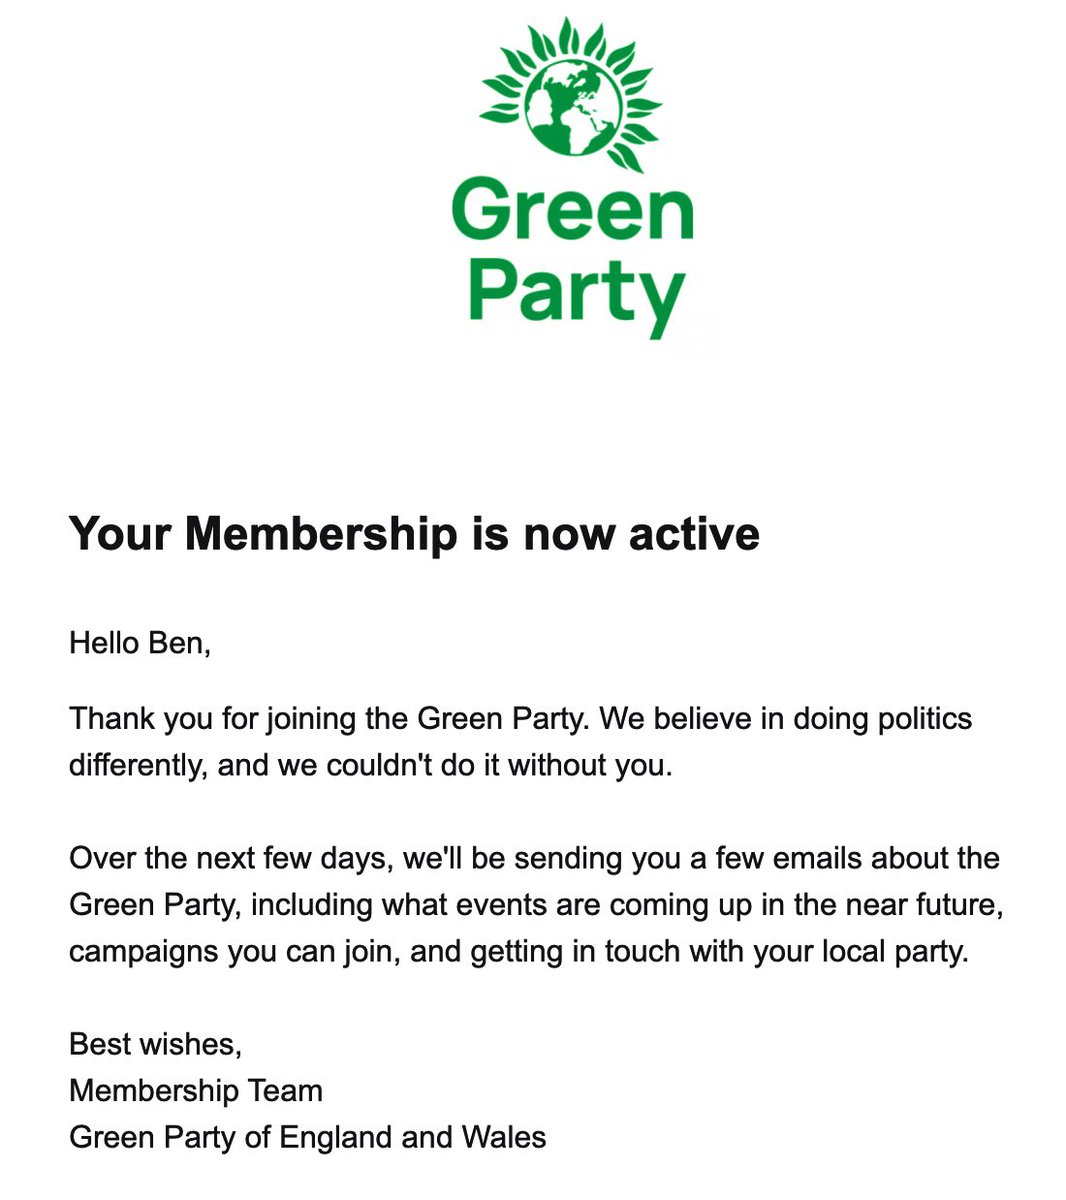 After a bit research and looking through the policies that are main points for me personally I have joined @TheGreenParty First time I have “joined” a party, but also the first time I have found Alot of the things I want to see when looking through a party’s policies.